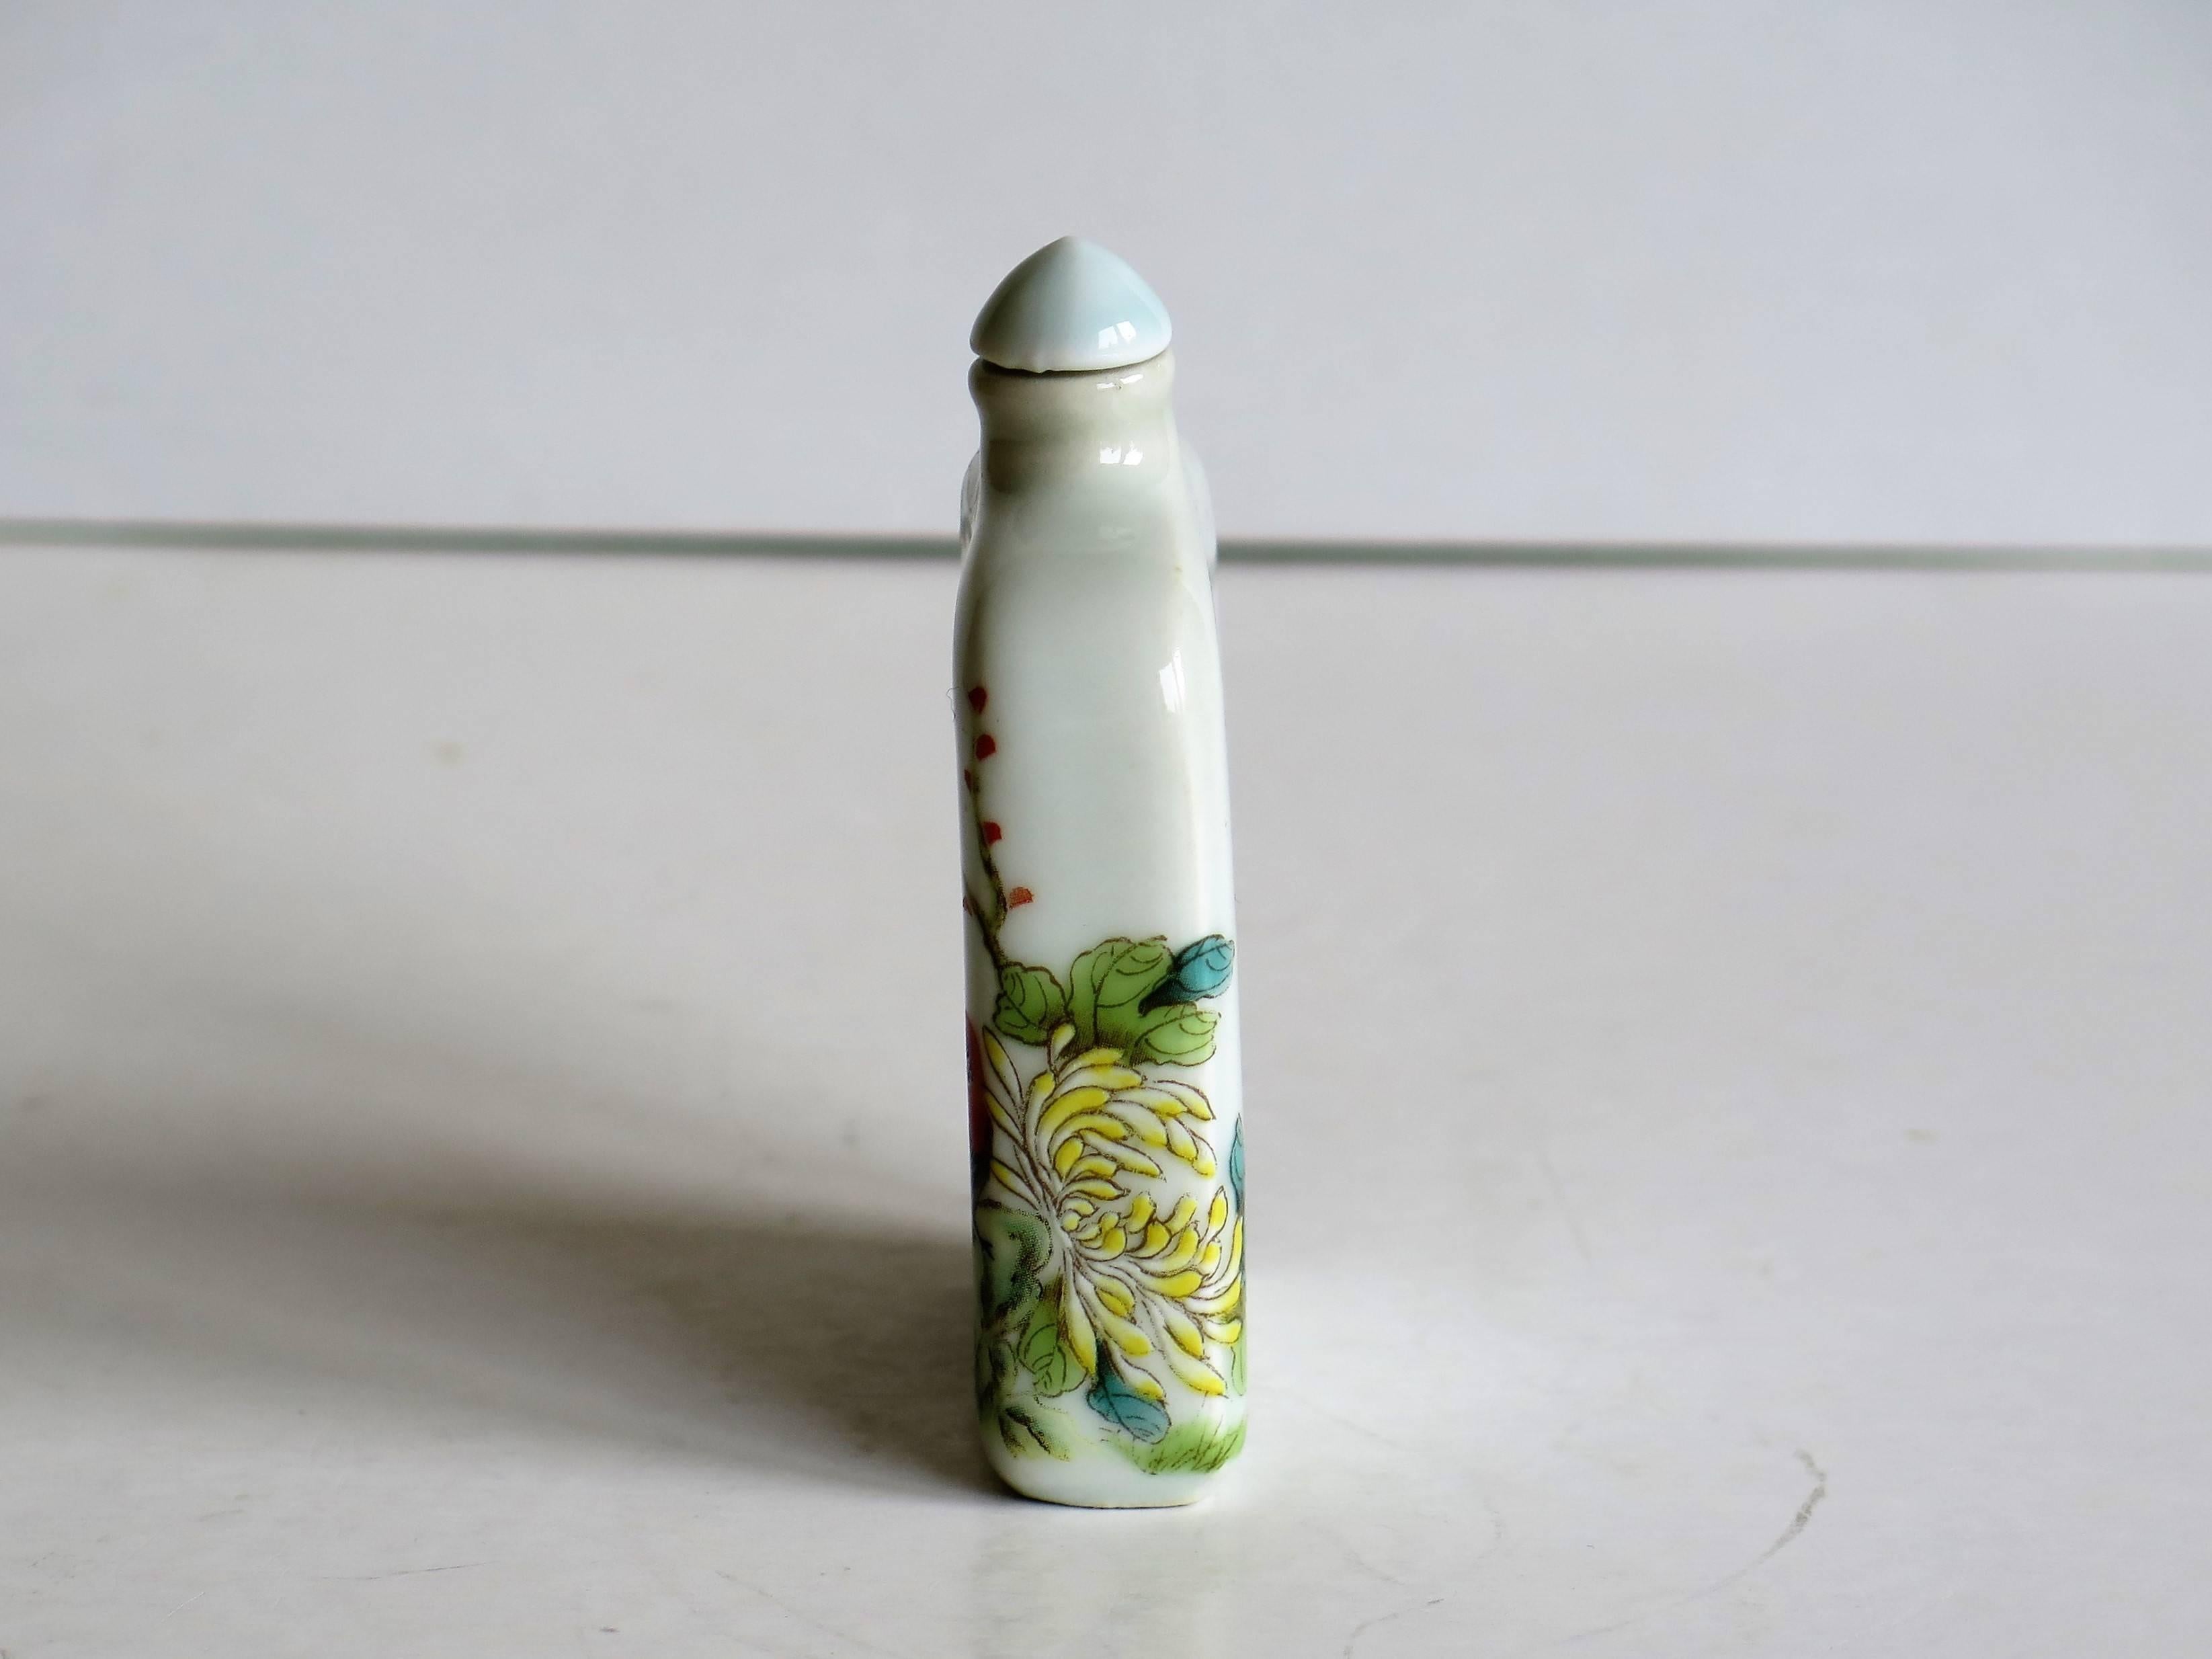 Qing Chinese Porcelain Snuff Bottle Hand-Painted Birds and Flowers, Circa 1940s